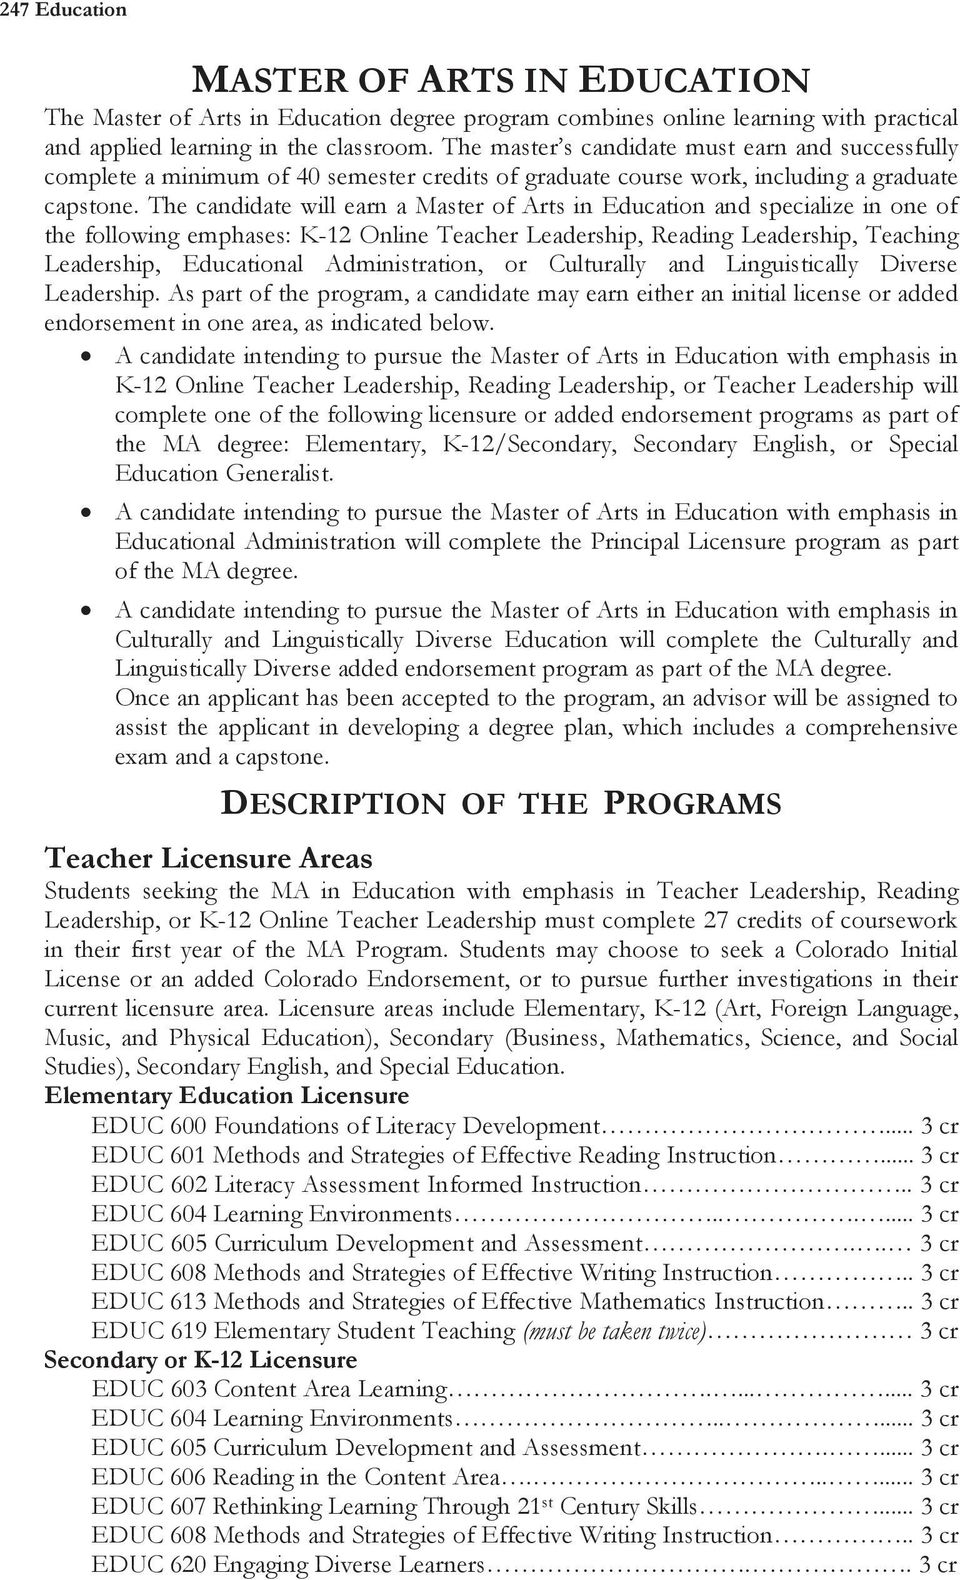 The candidate will earn a Master of Arts in Education and specialize in one of the following emphases: K-12 Online Teacher Leadership, Reading Leadership, Teaching Leadership, Educational